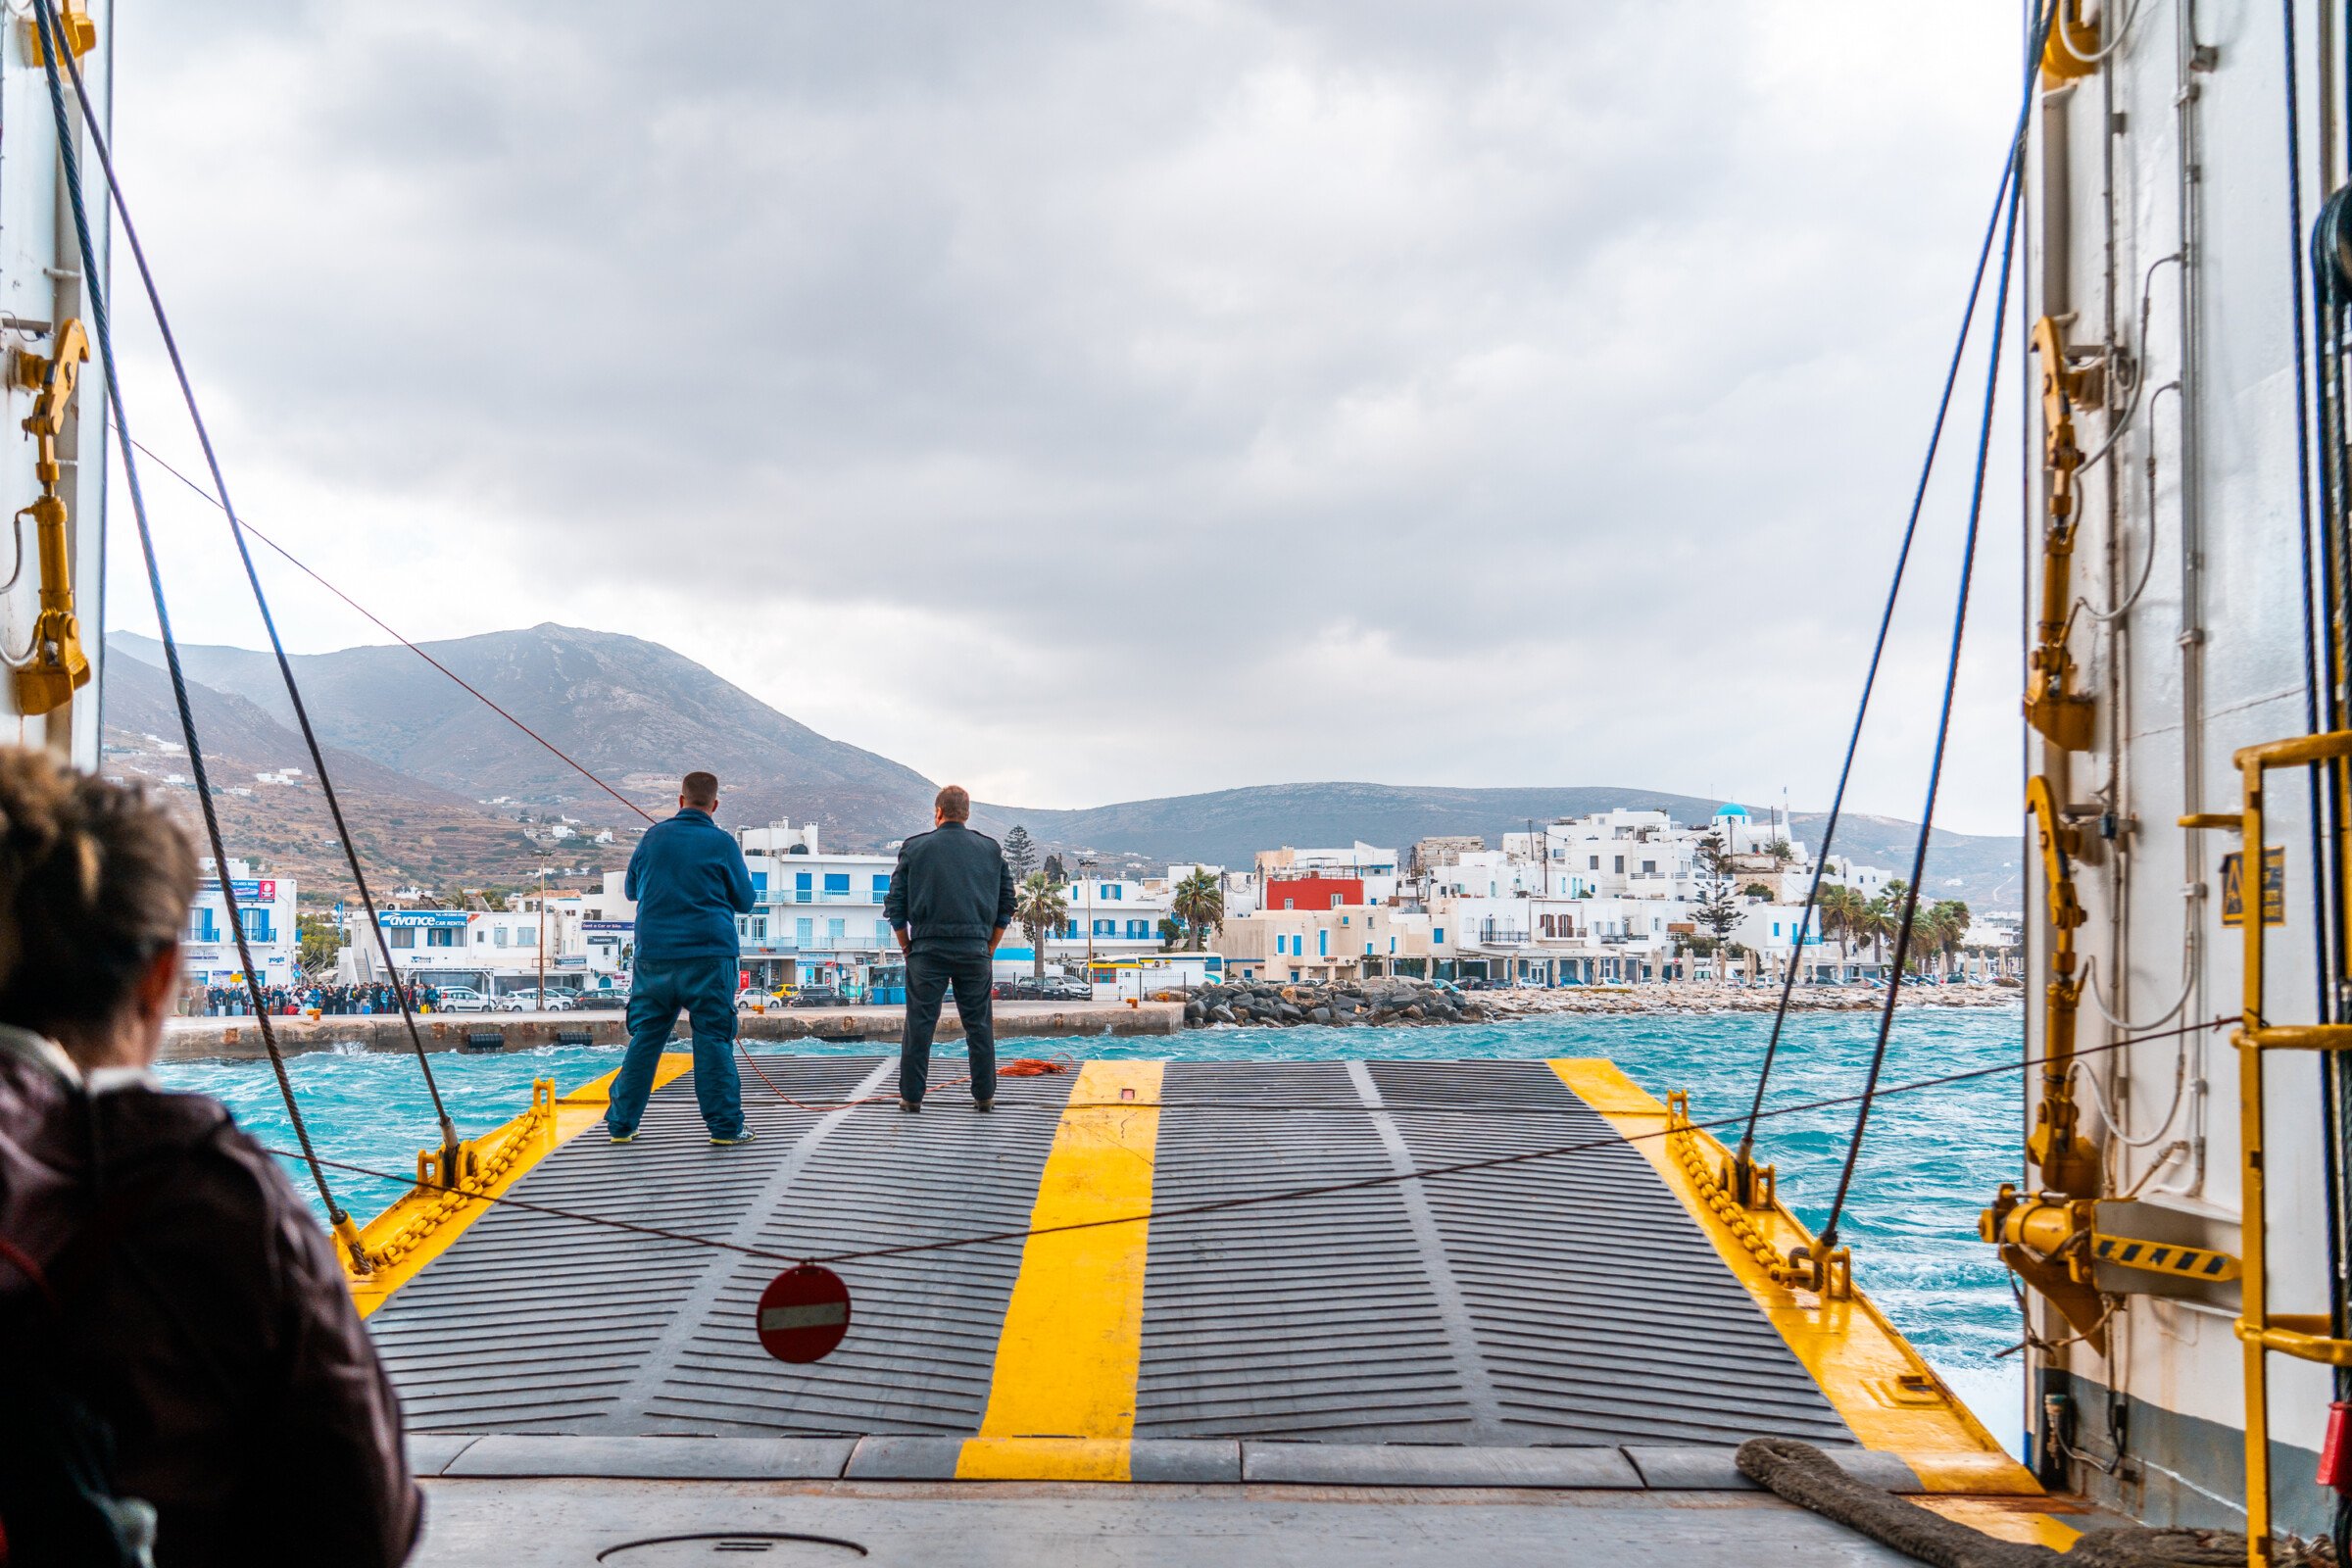 This image shows two people standing at the half open ferry door as the ferry approaches Parikia Port in Paros. 